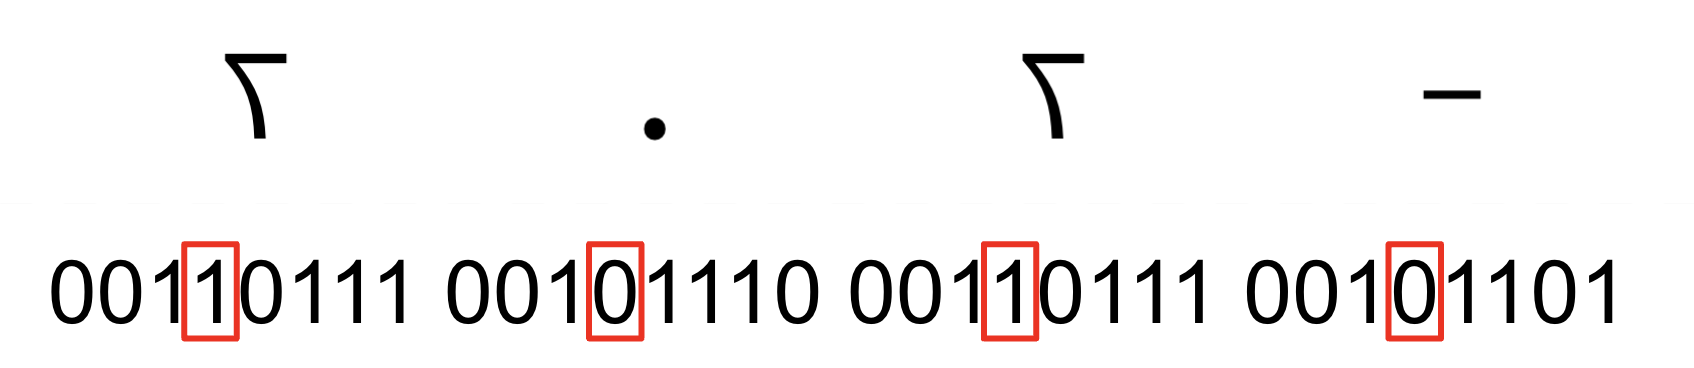 Image shows the little-endian order of ASCII bytes that spell out -7.7.
Bit number 4 in each byte is marked with a red rectangle.